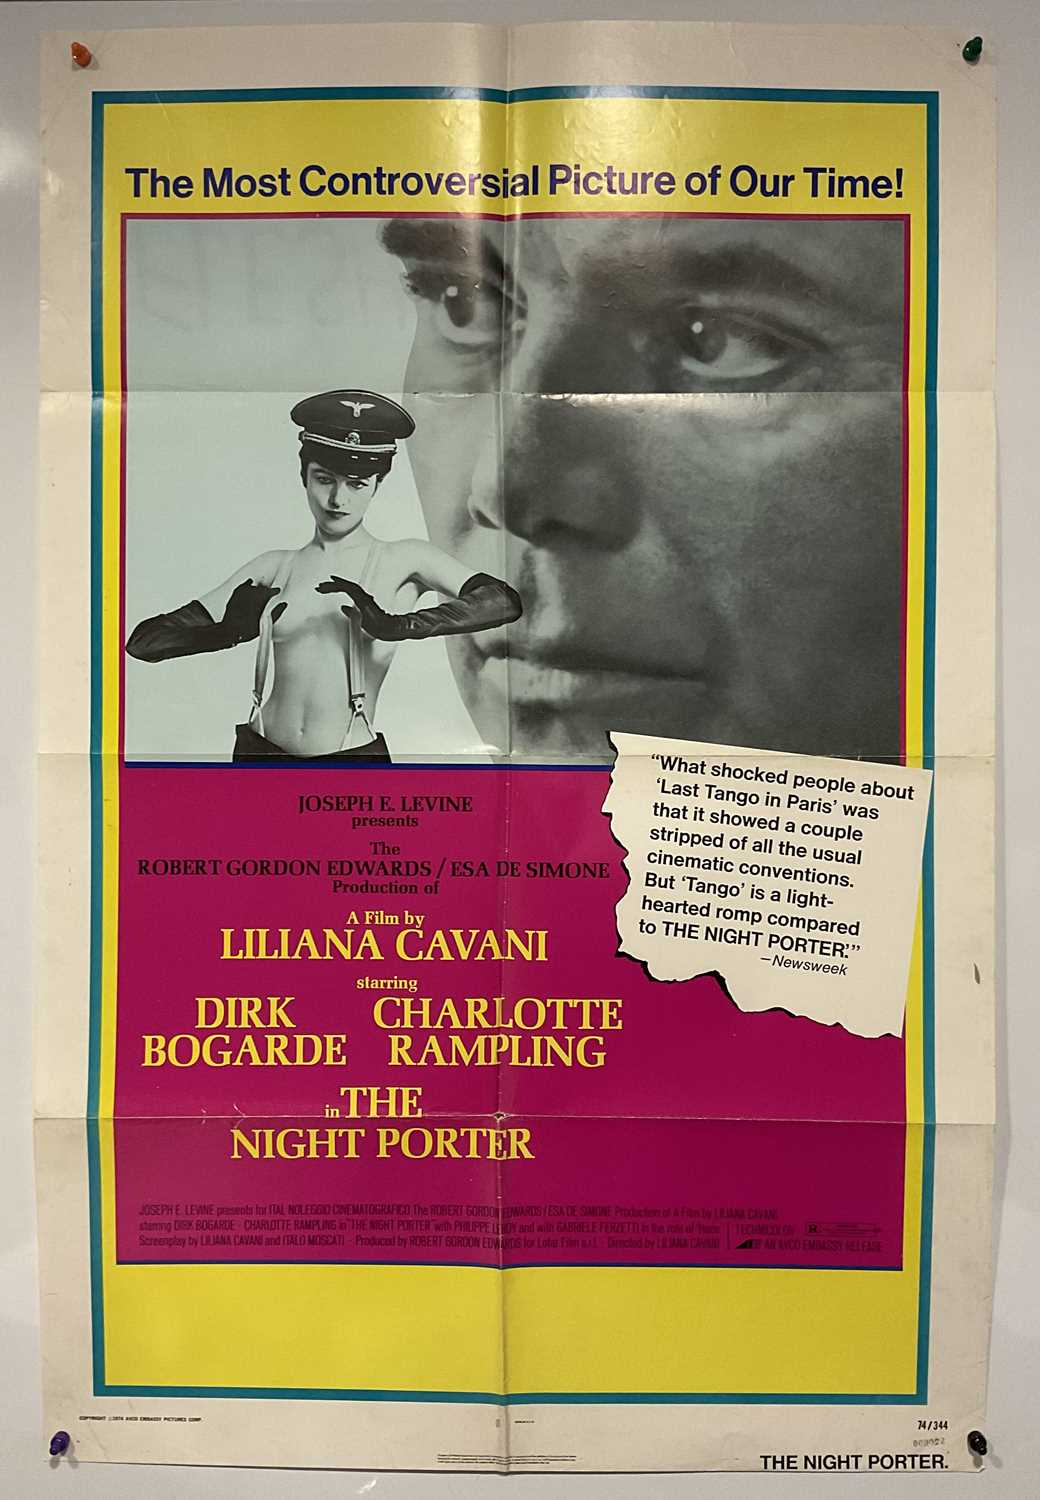 THE NIGHT PORTER (1974) US One sheet, folded. ***Condition*** Graffiti to rear, some holes on folds